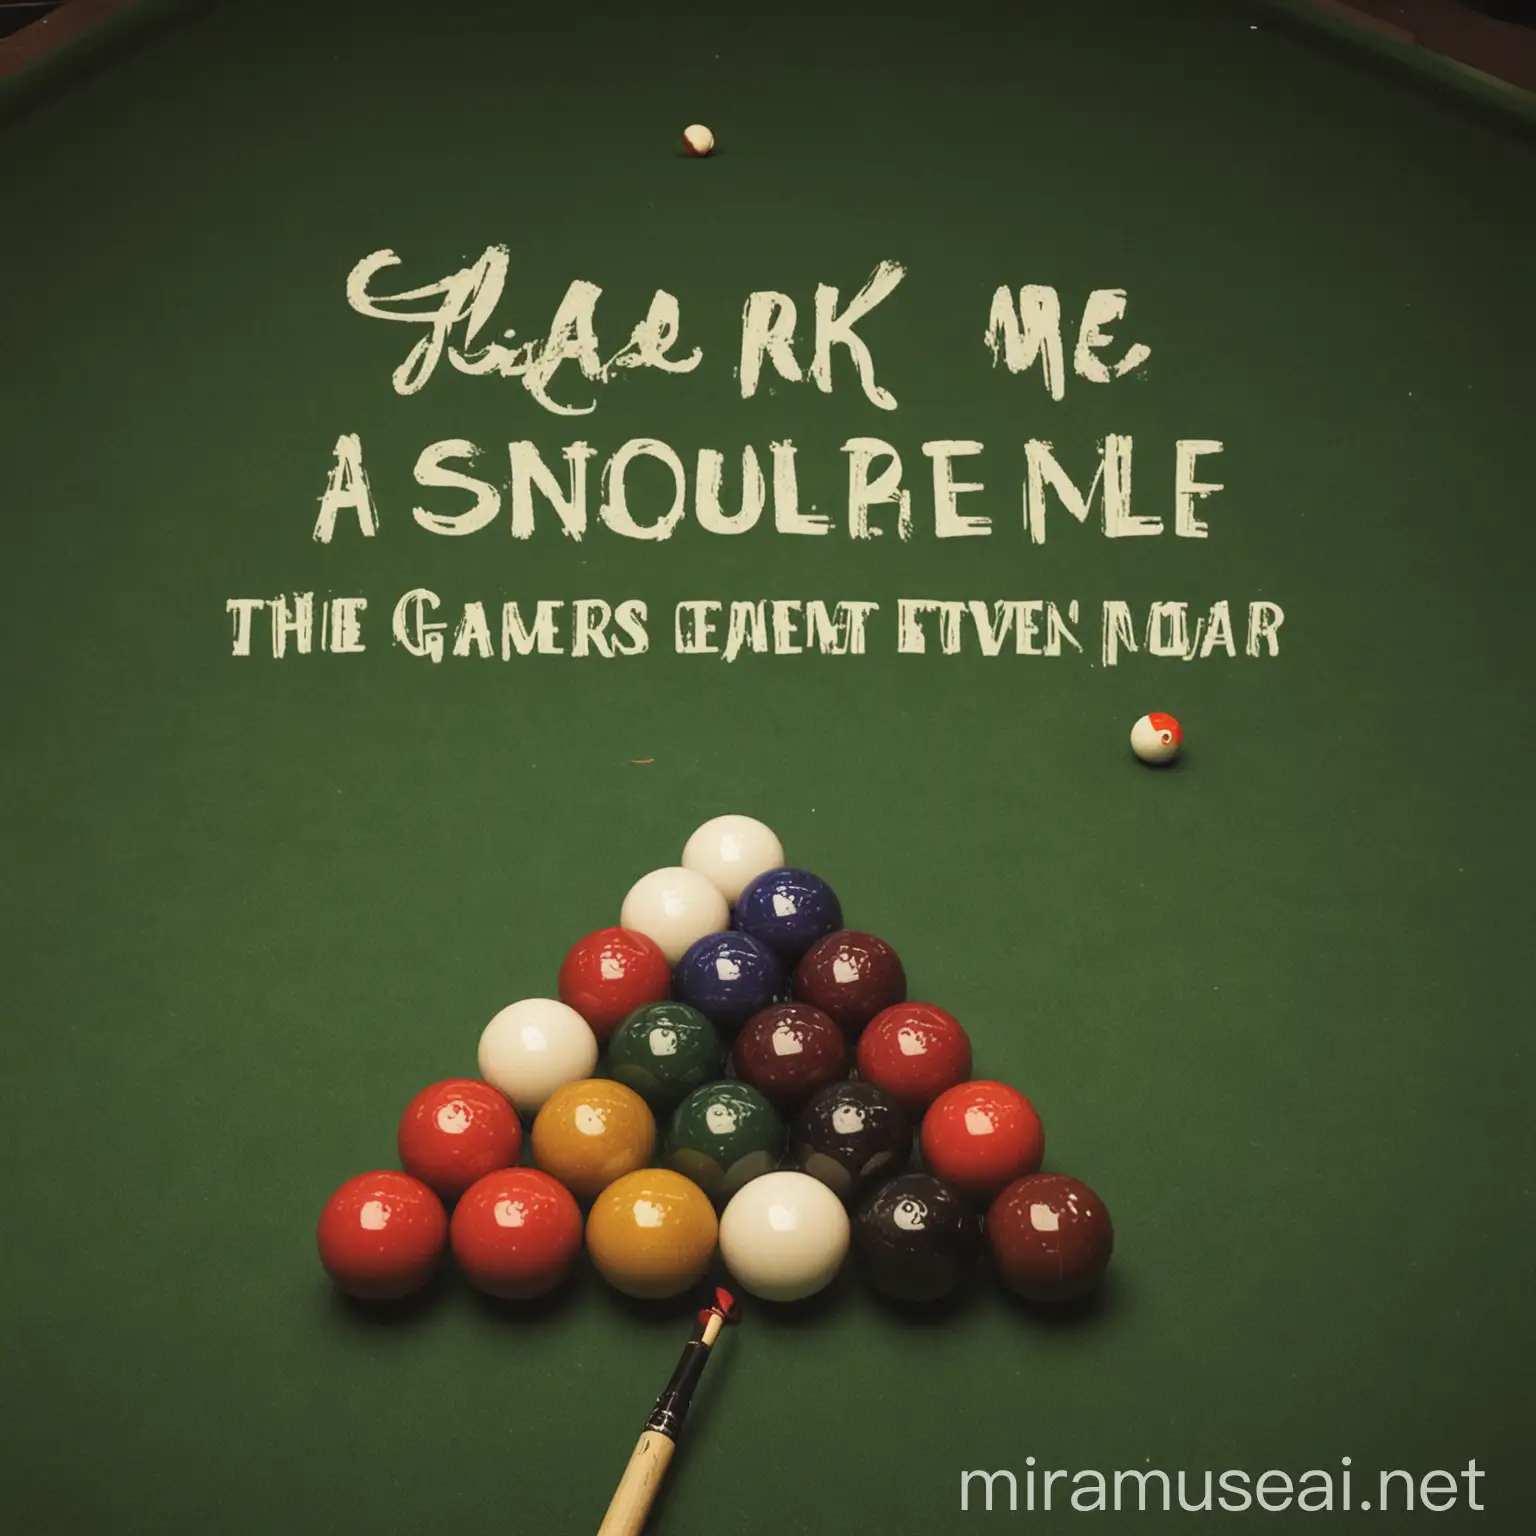 Elegant Evening Snooker Tournament and Games Night